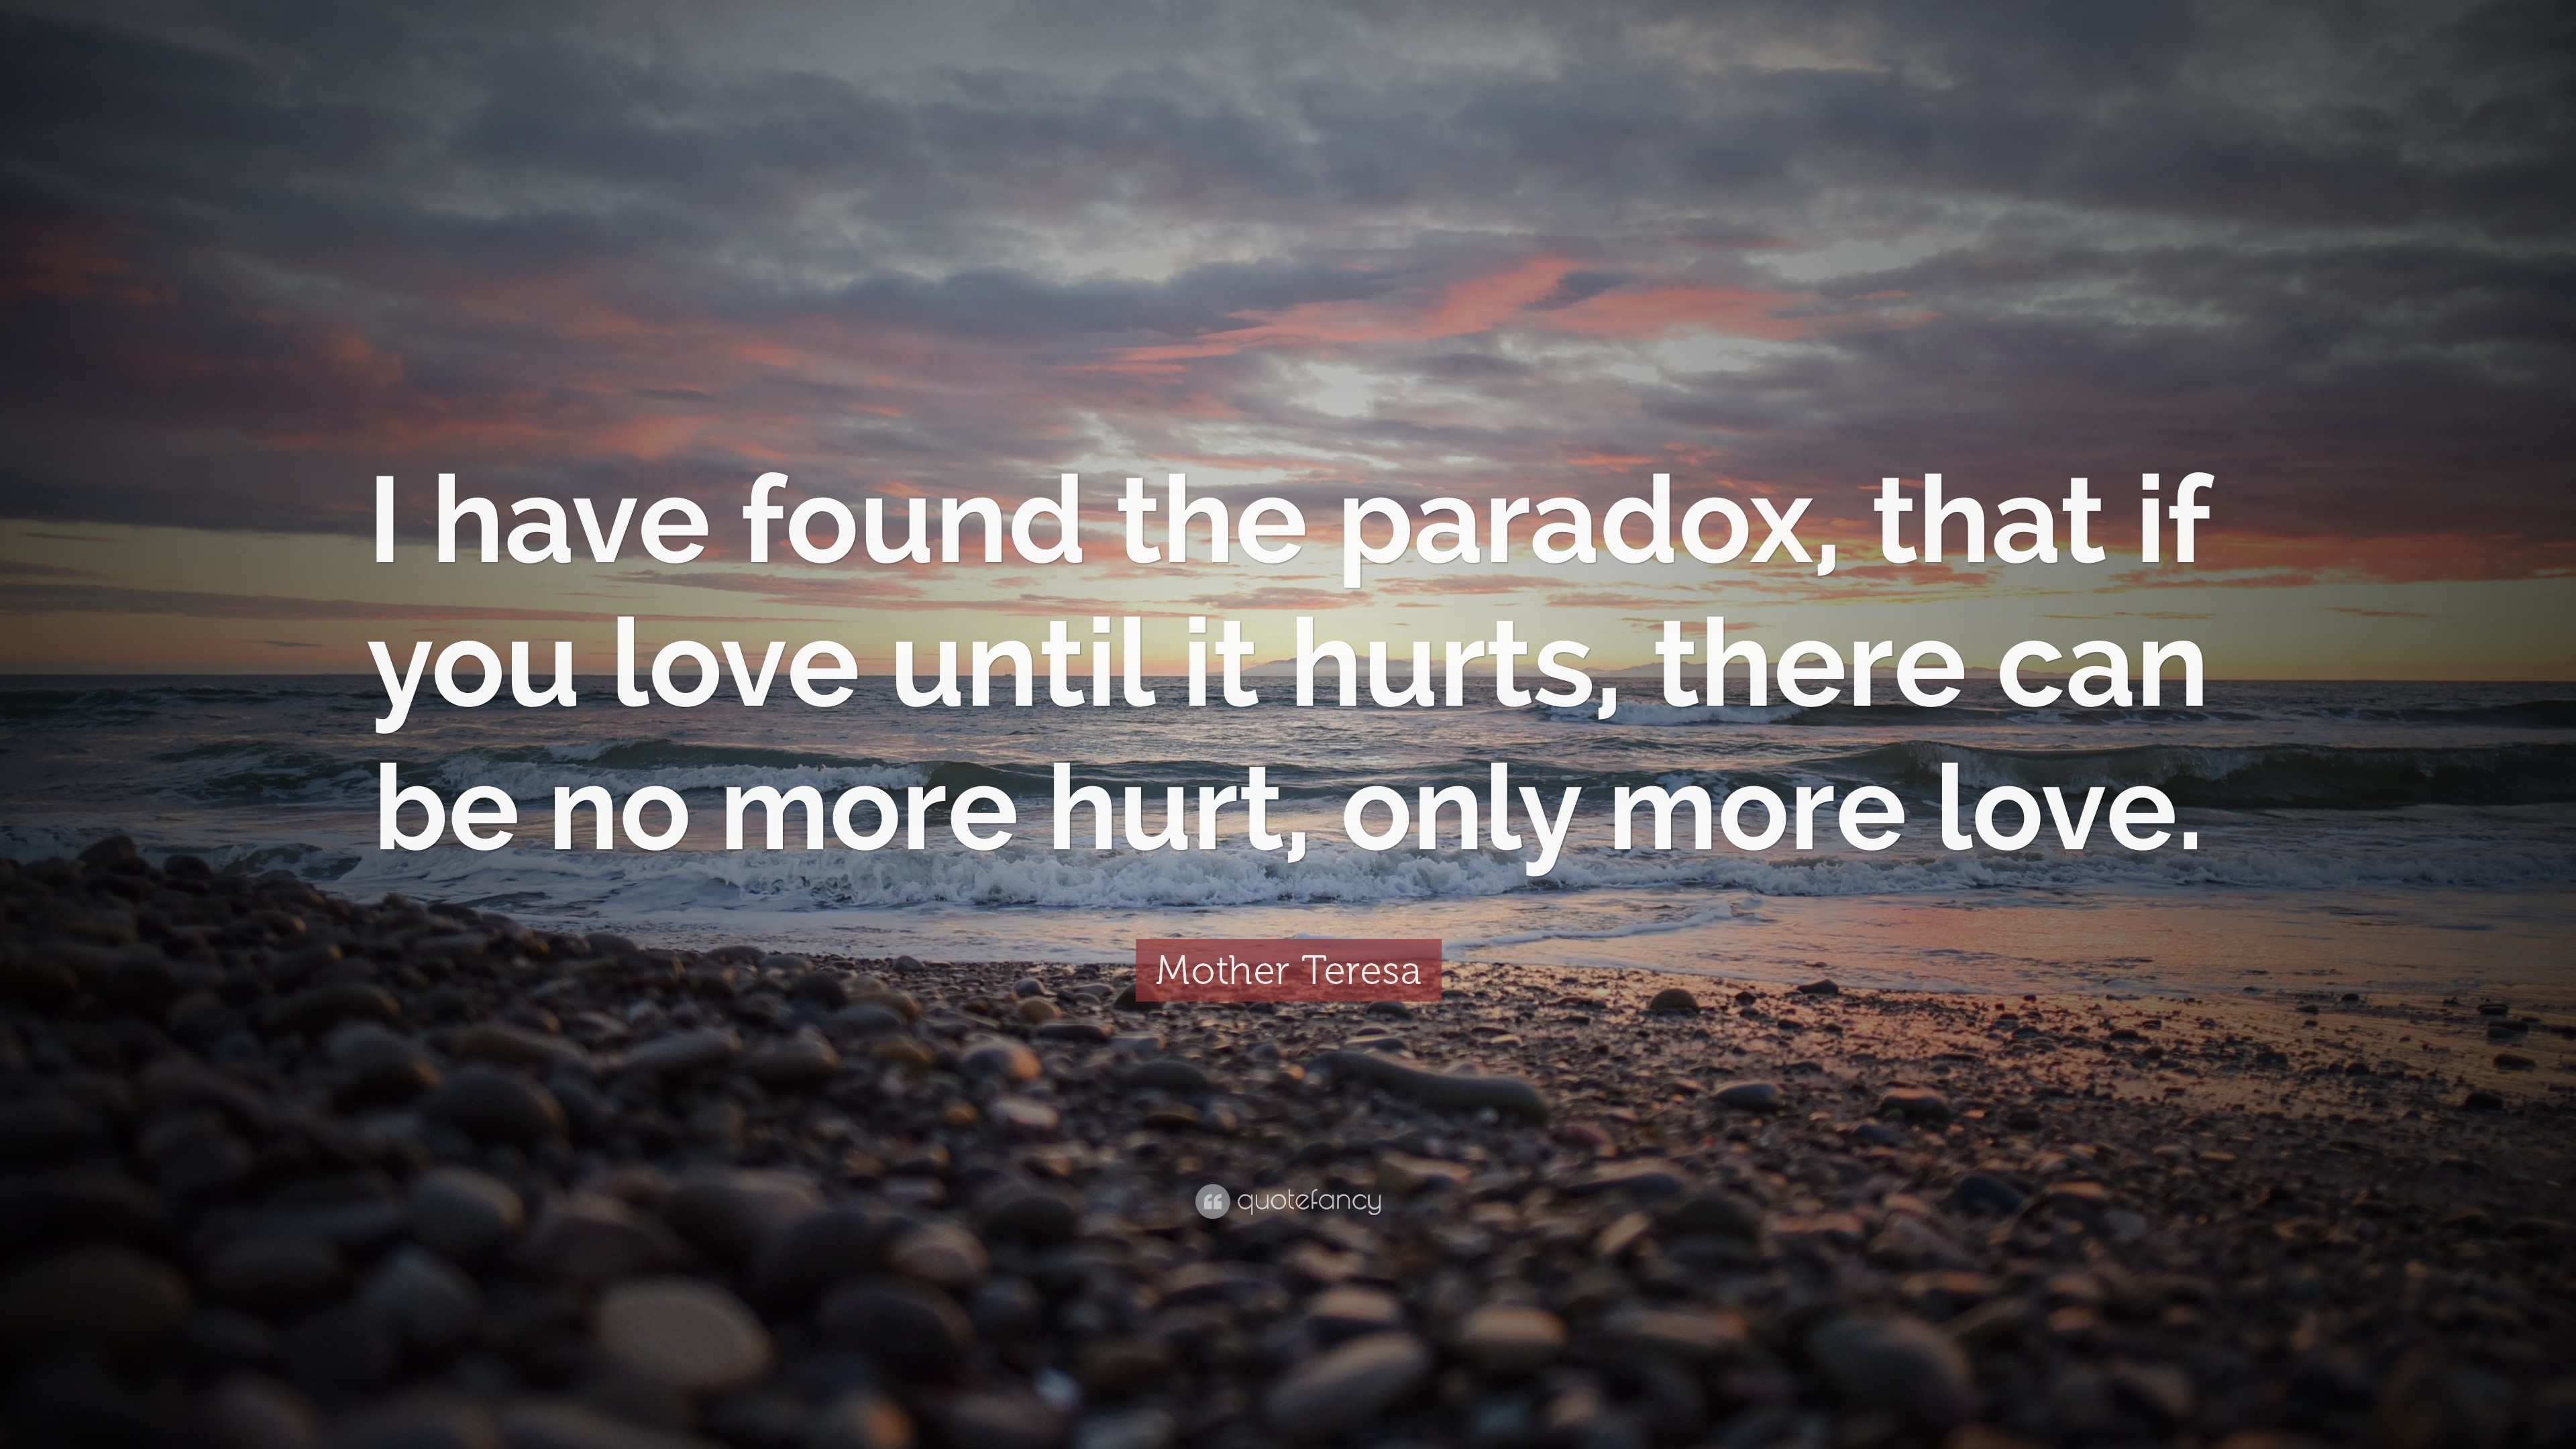 3840x2160 Mother Teresa Quote: “I have found the paradox, that if you love until